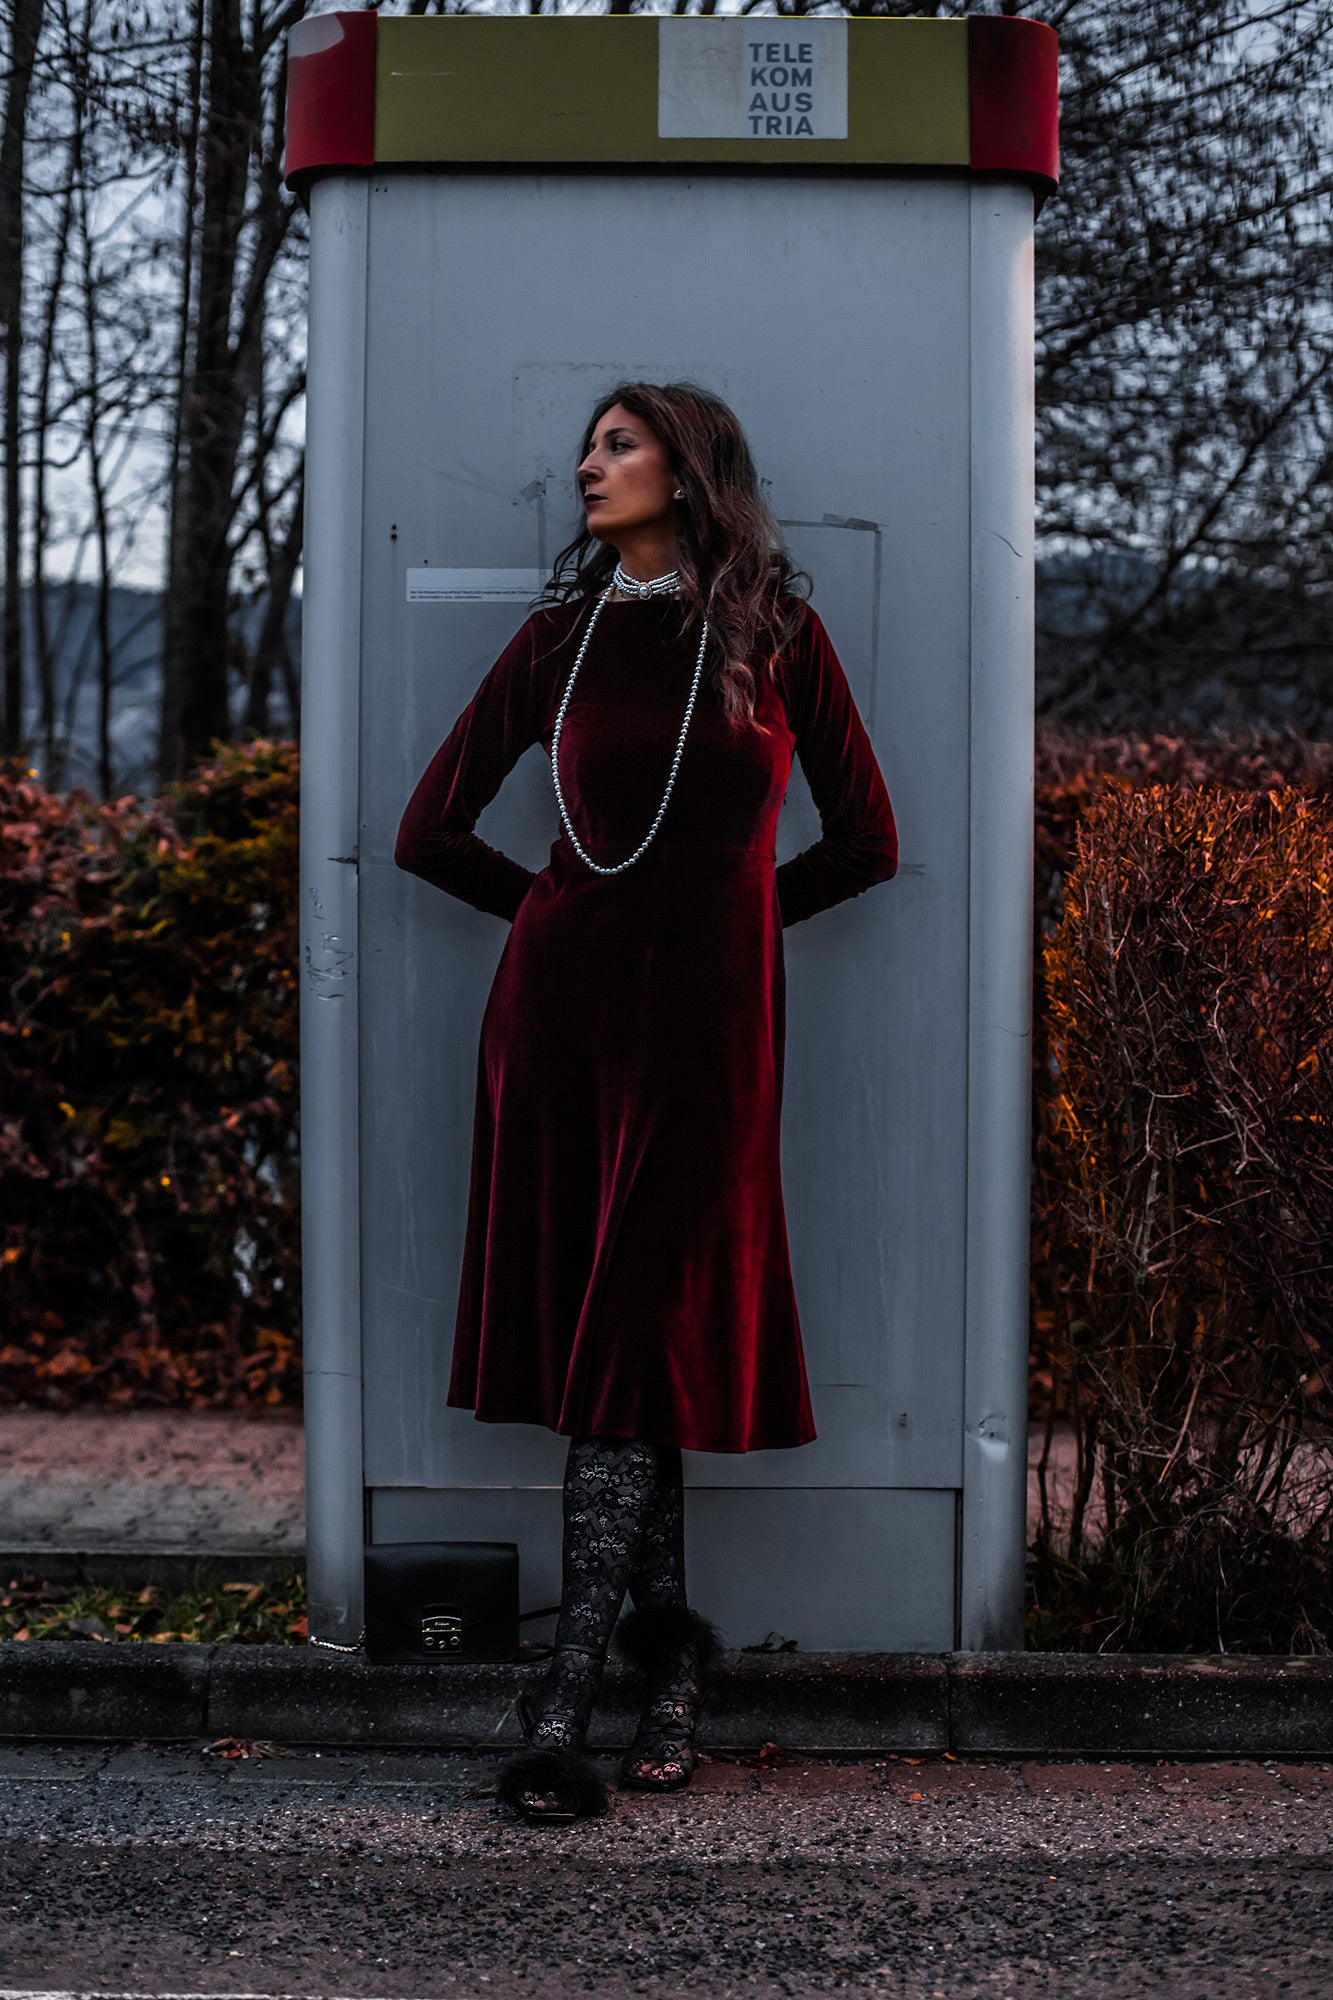 In the ever-evolving realm of fashion, where trends come and go, velvet stands as a timeless classic. Adding a whisper of quiet luxury to your wardrobe, a velvet dress is an investment in enduring elegance.